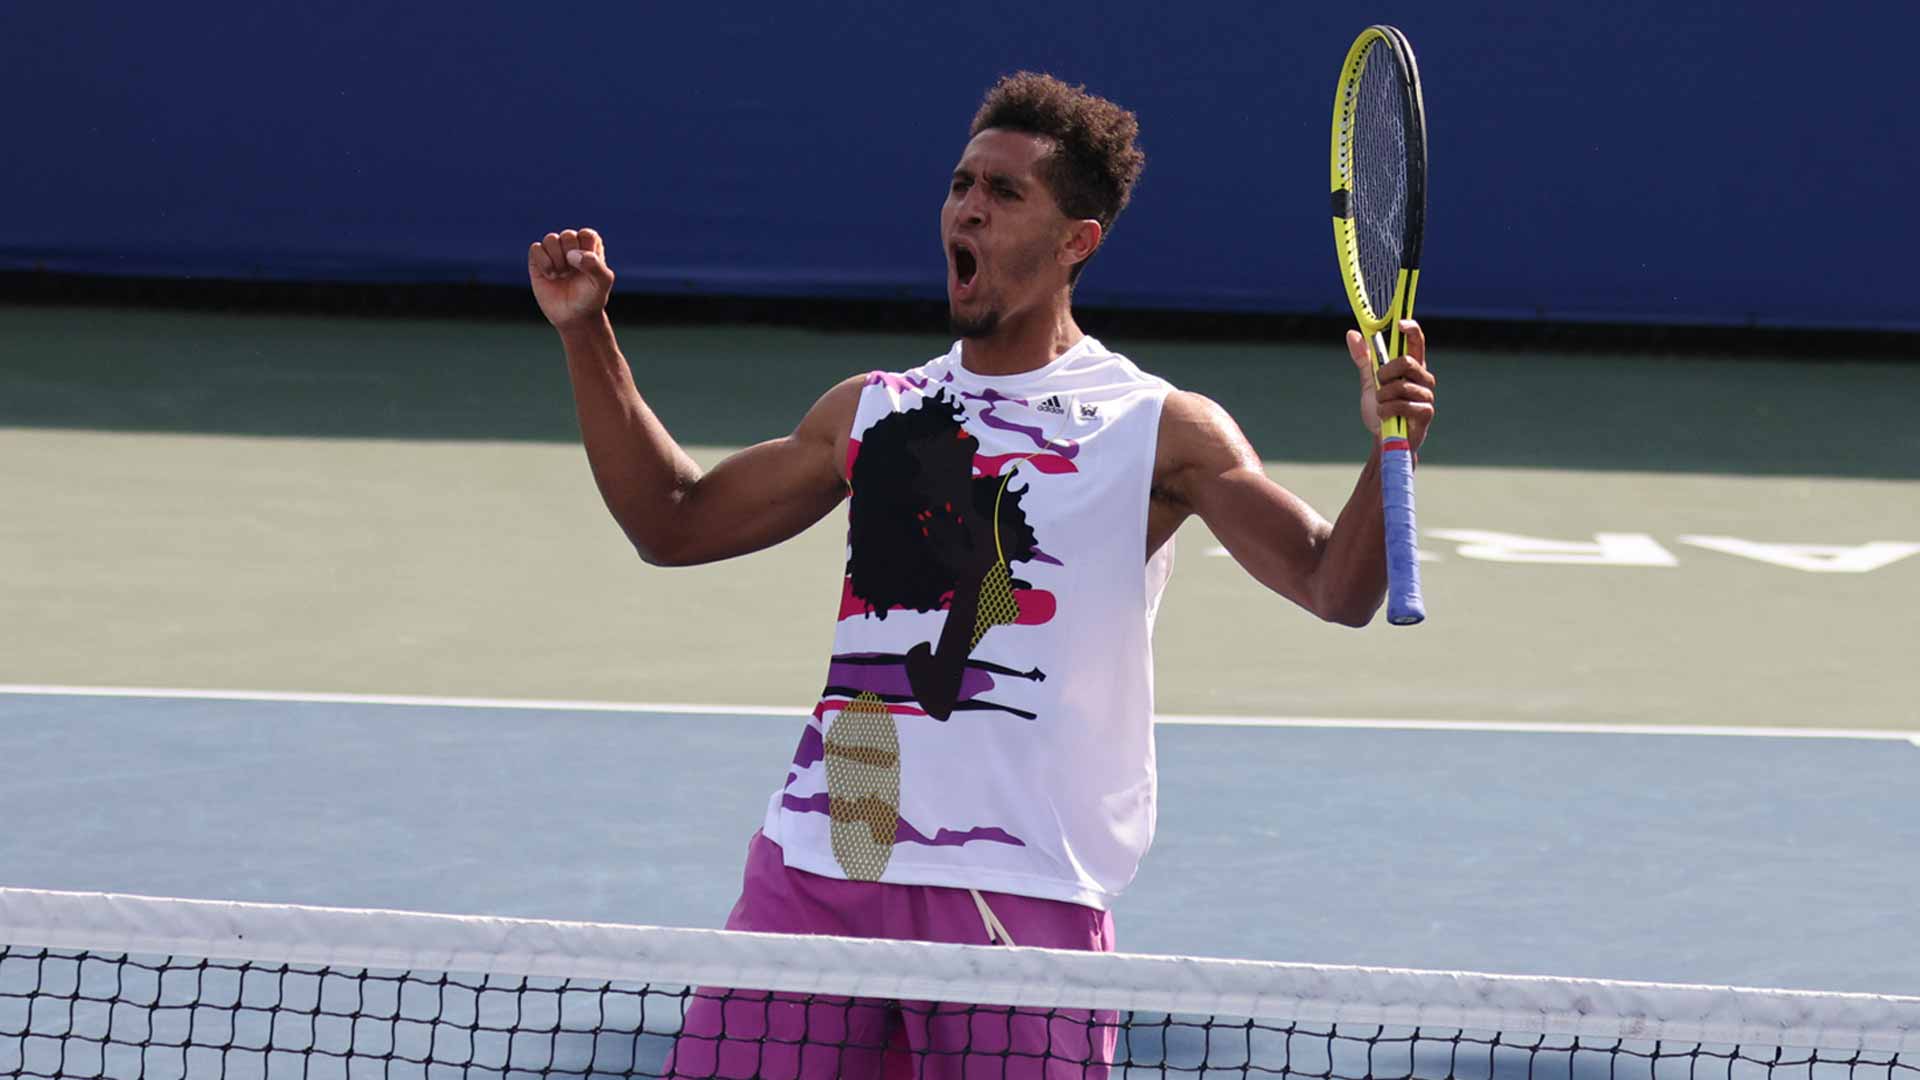 Michael Mmoh celebrates winning the Cary Challenger in September 2022.